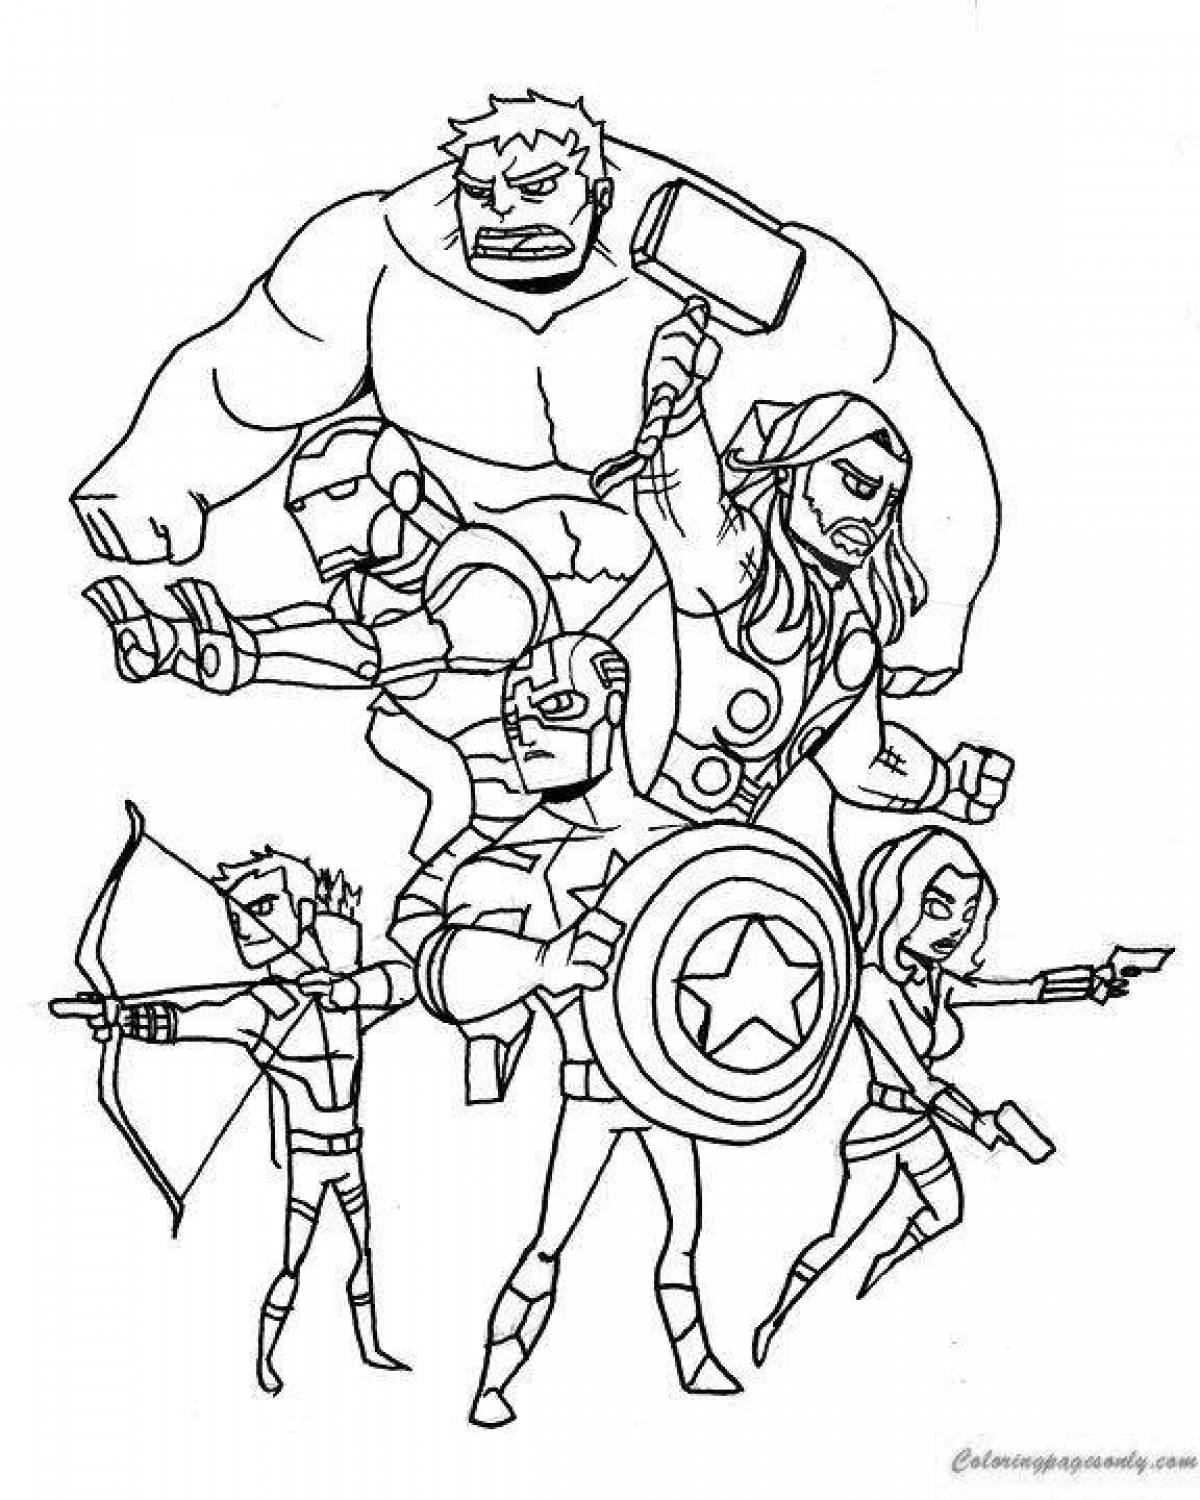 Avengers coloring book